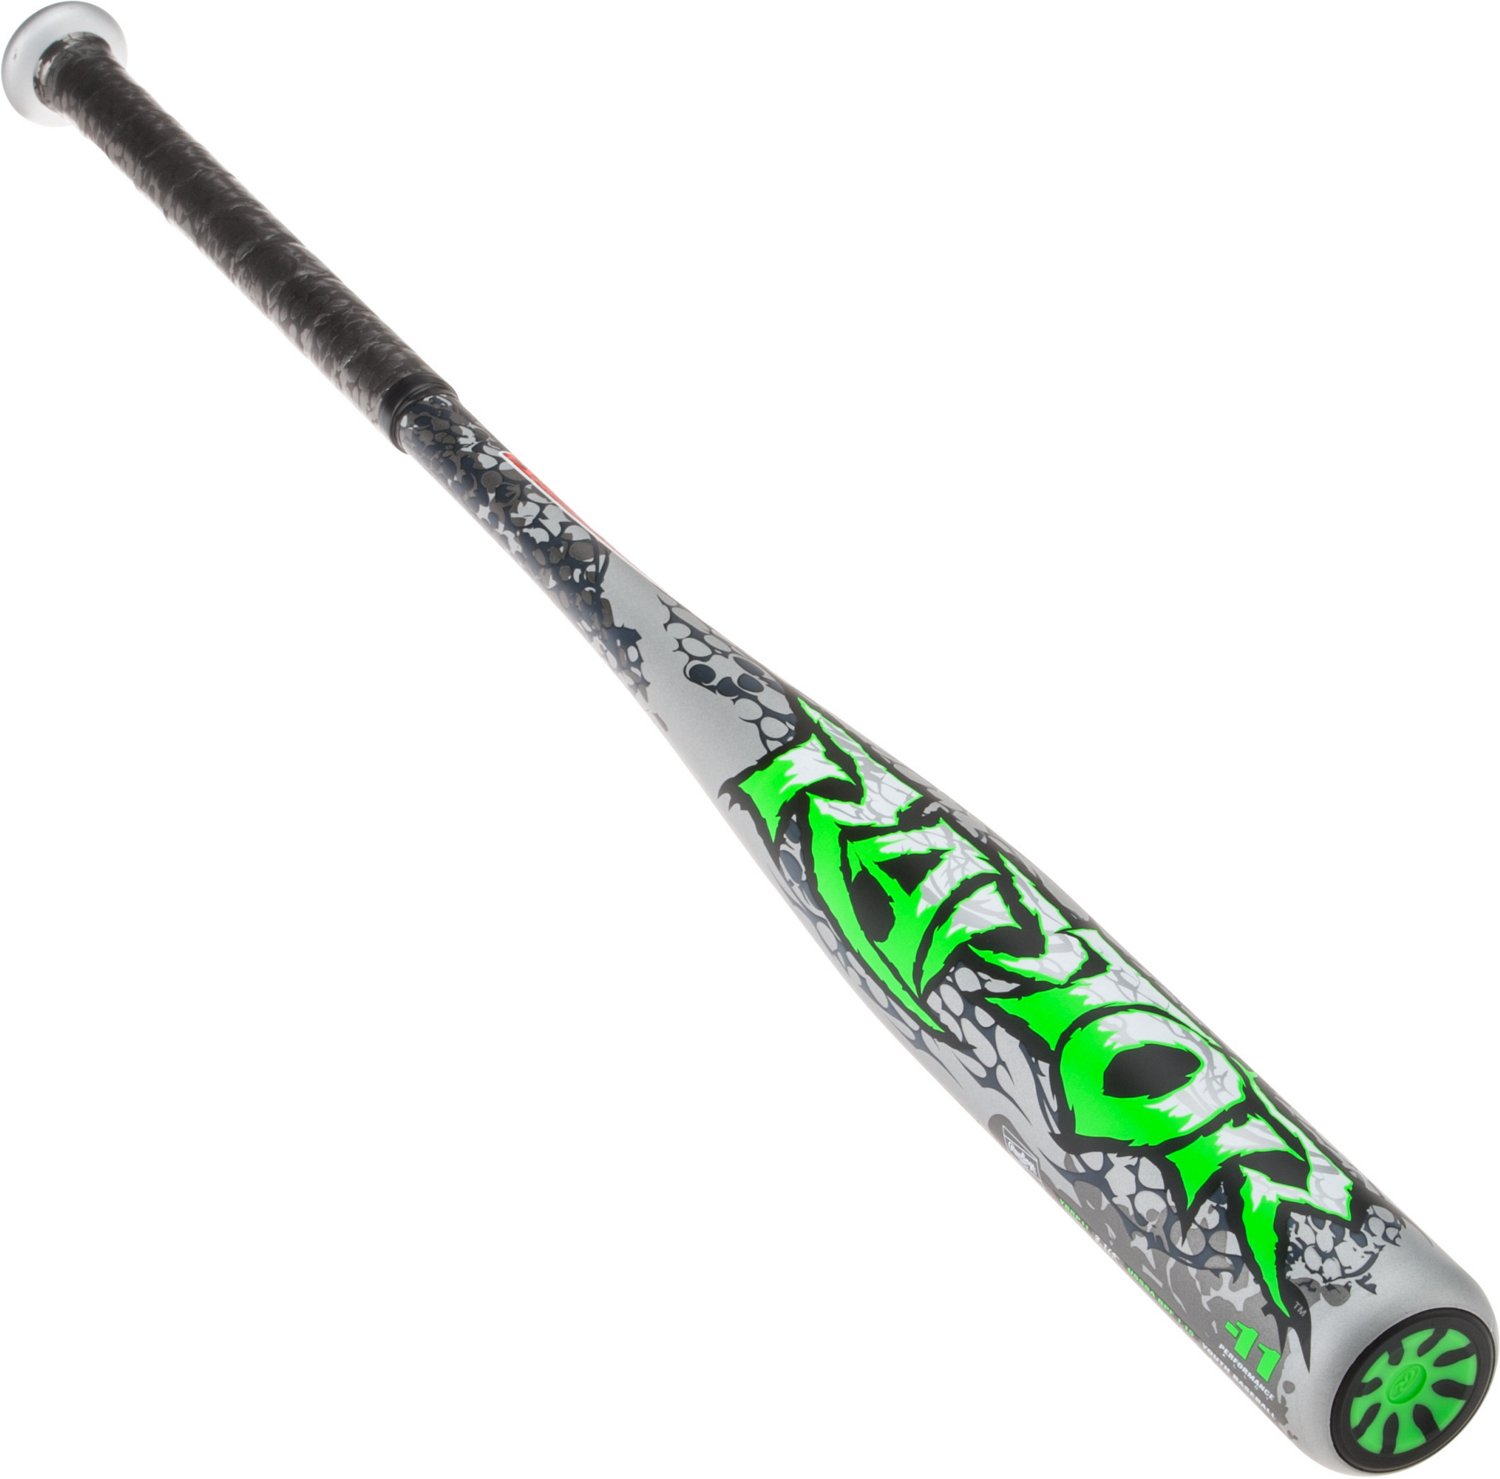 Why it’s important to choose a good baseball bat?